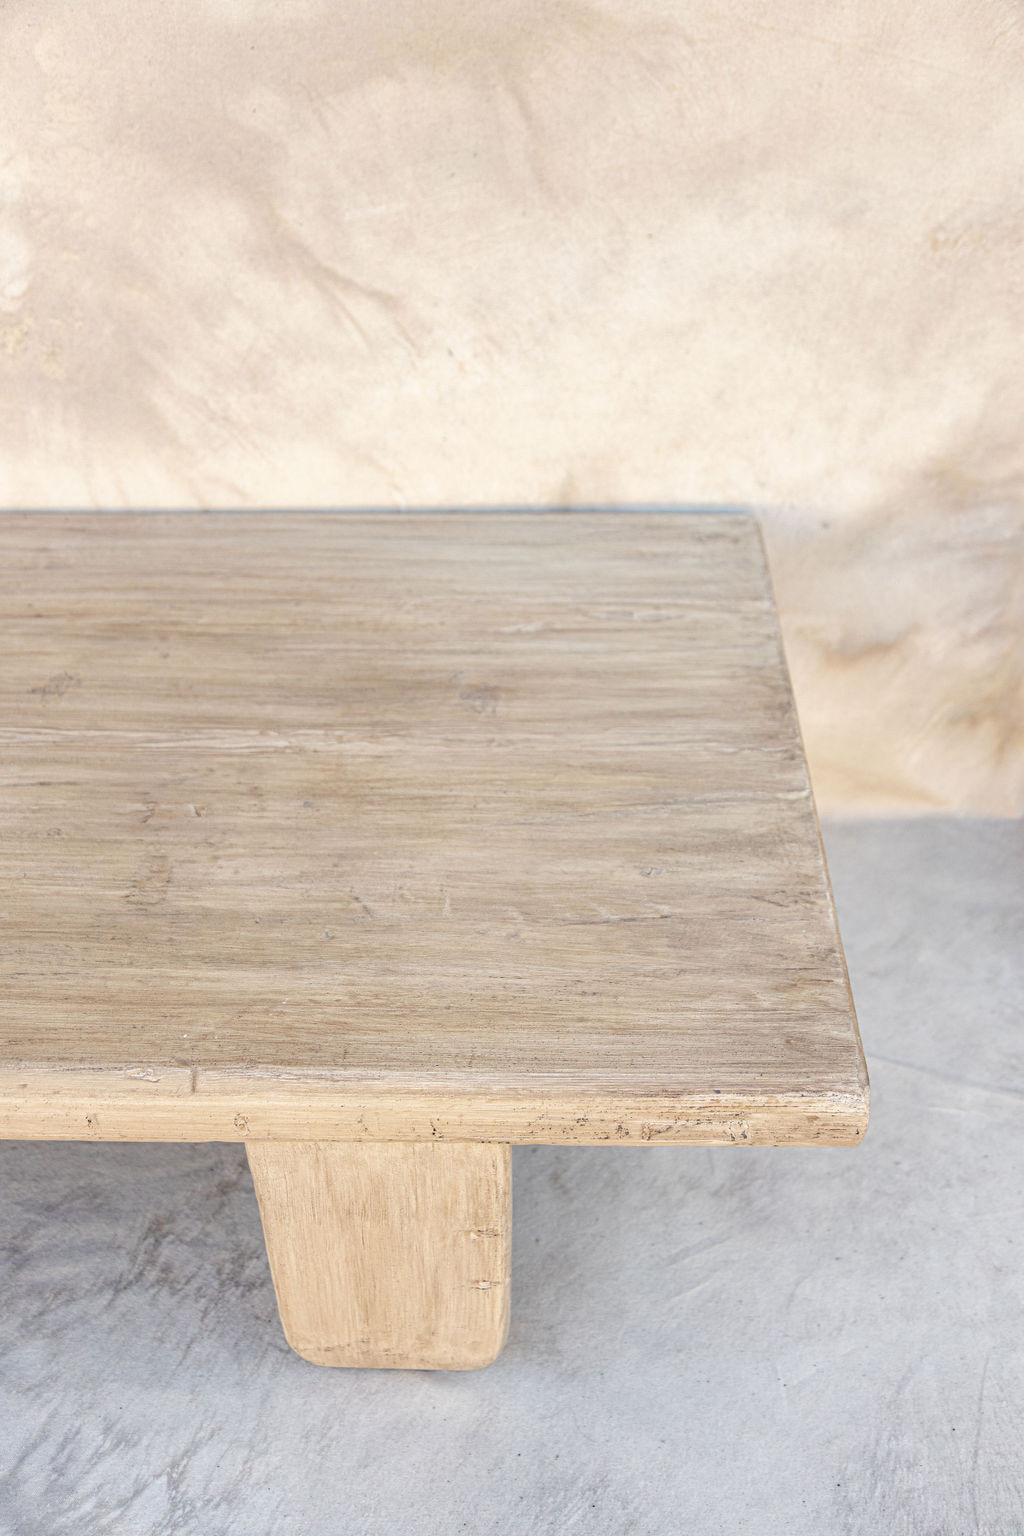 Introducing our Liam coffee table. Crafted from vintage elm wood sourced throughout Europe and Asia, no two pieces are ever the same. We love this piece for it’s rustic texture, natural wood tones and rounded legs.